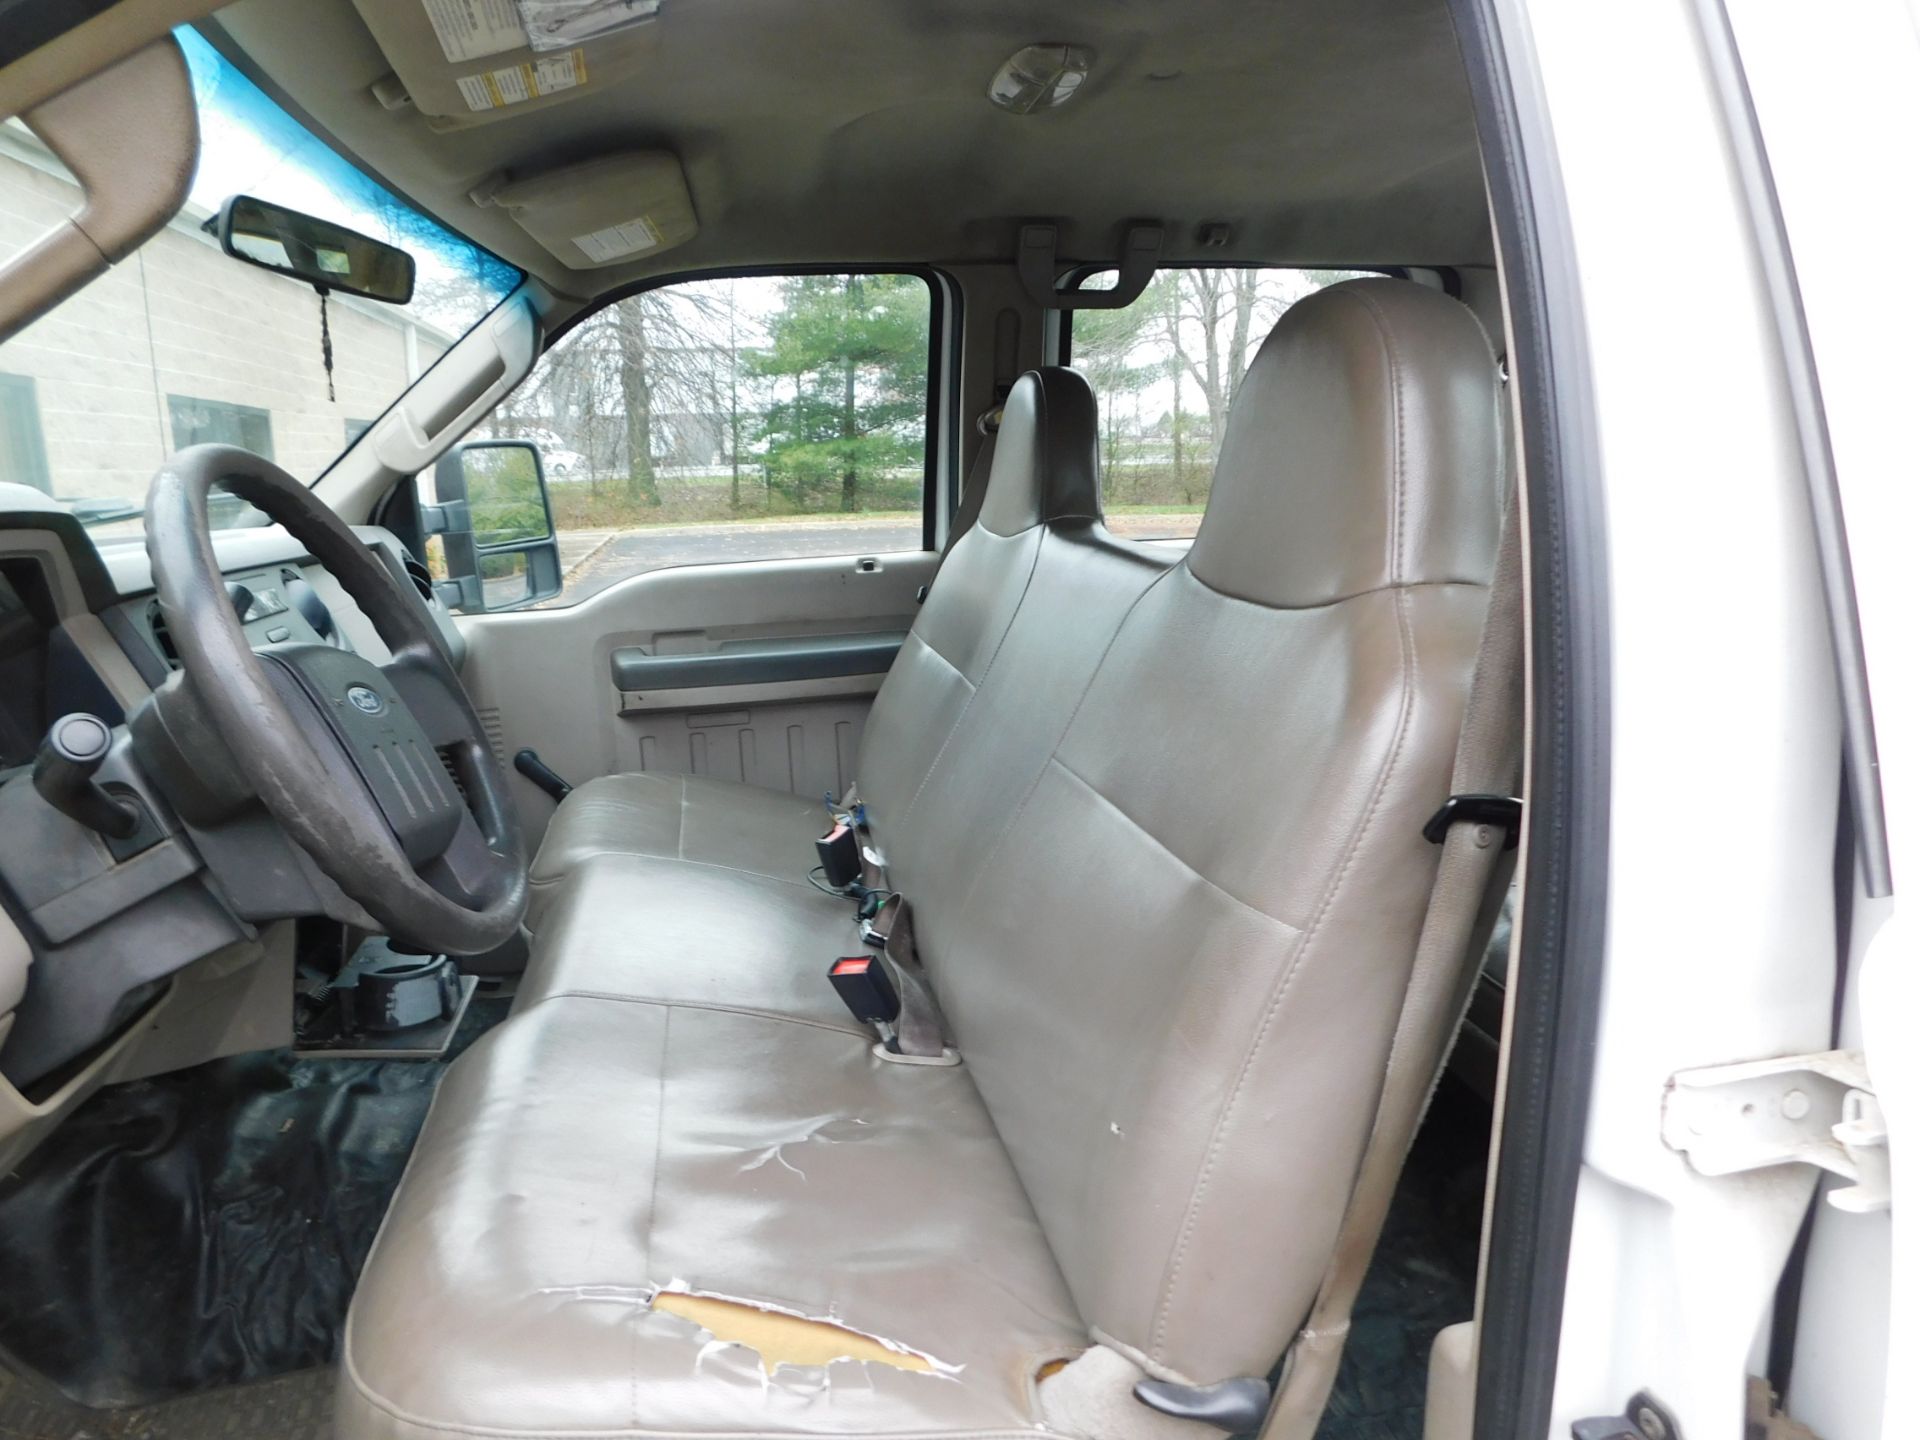 2008 Ford F250XL Super Duty Pick Up Truck, VIN 1FTSW20548EB51209, Crew Cab, Automatic, 8' Bed, 190, - Image 34 of 36